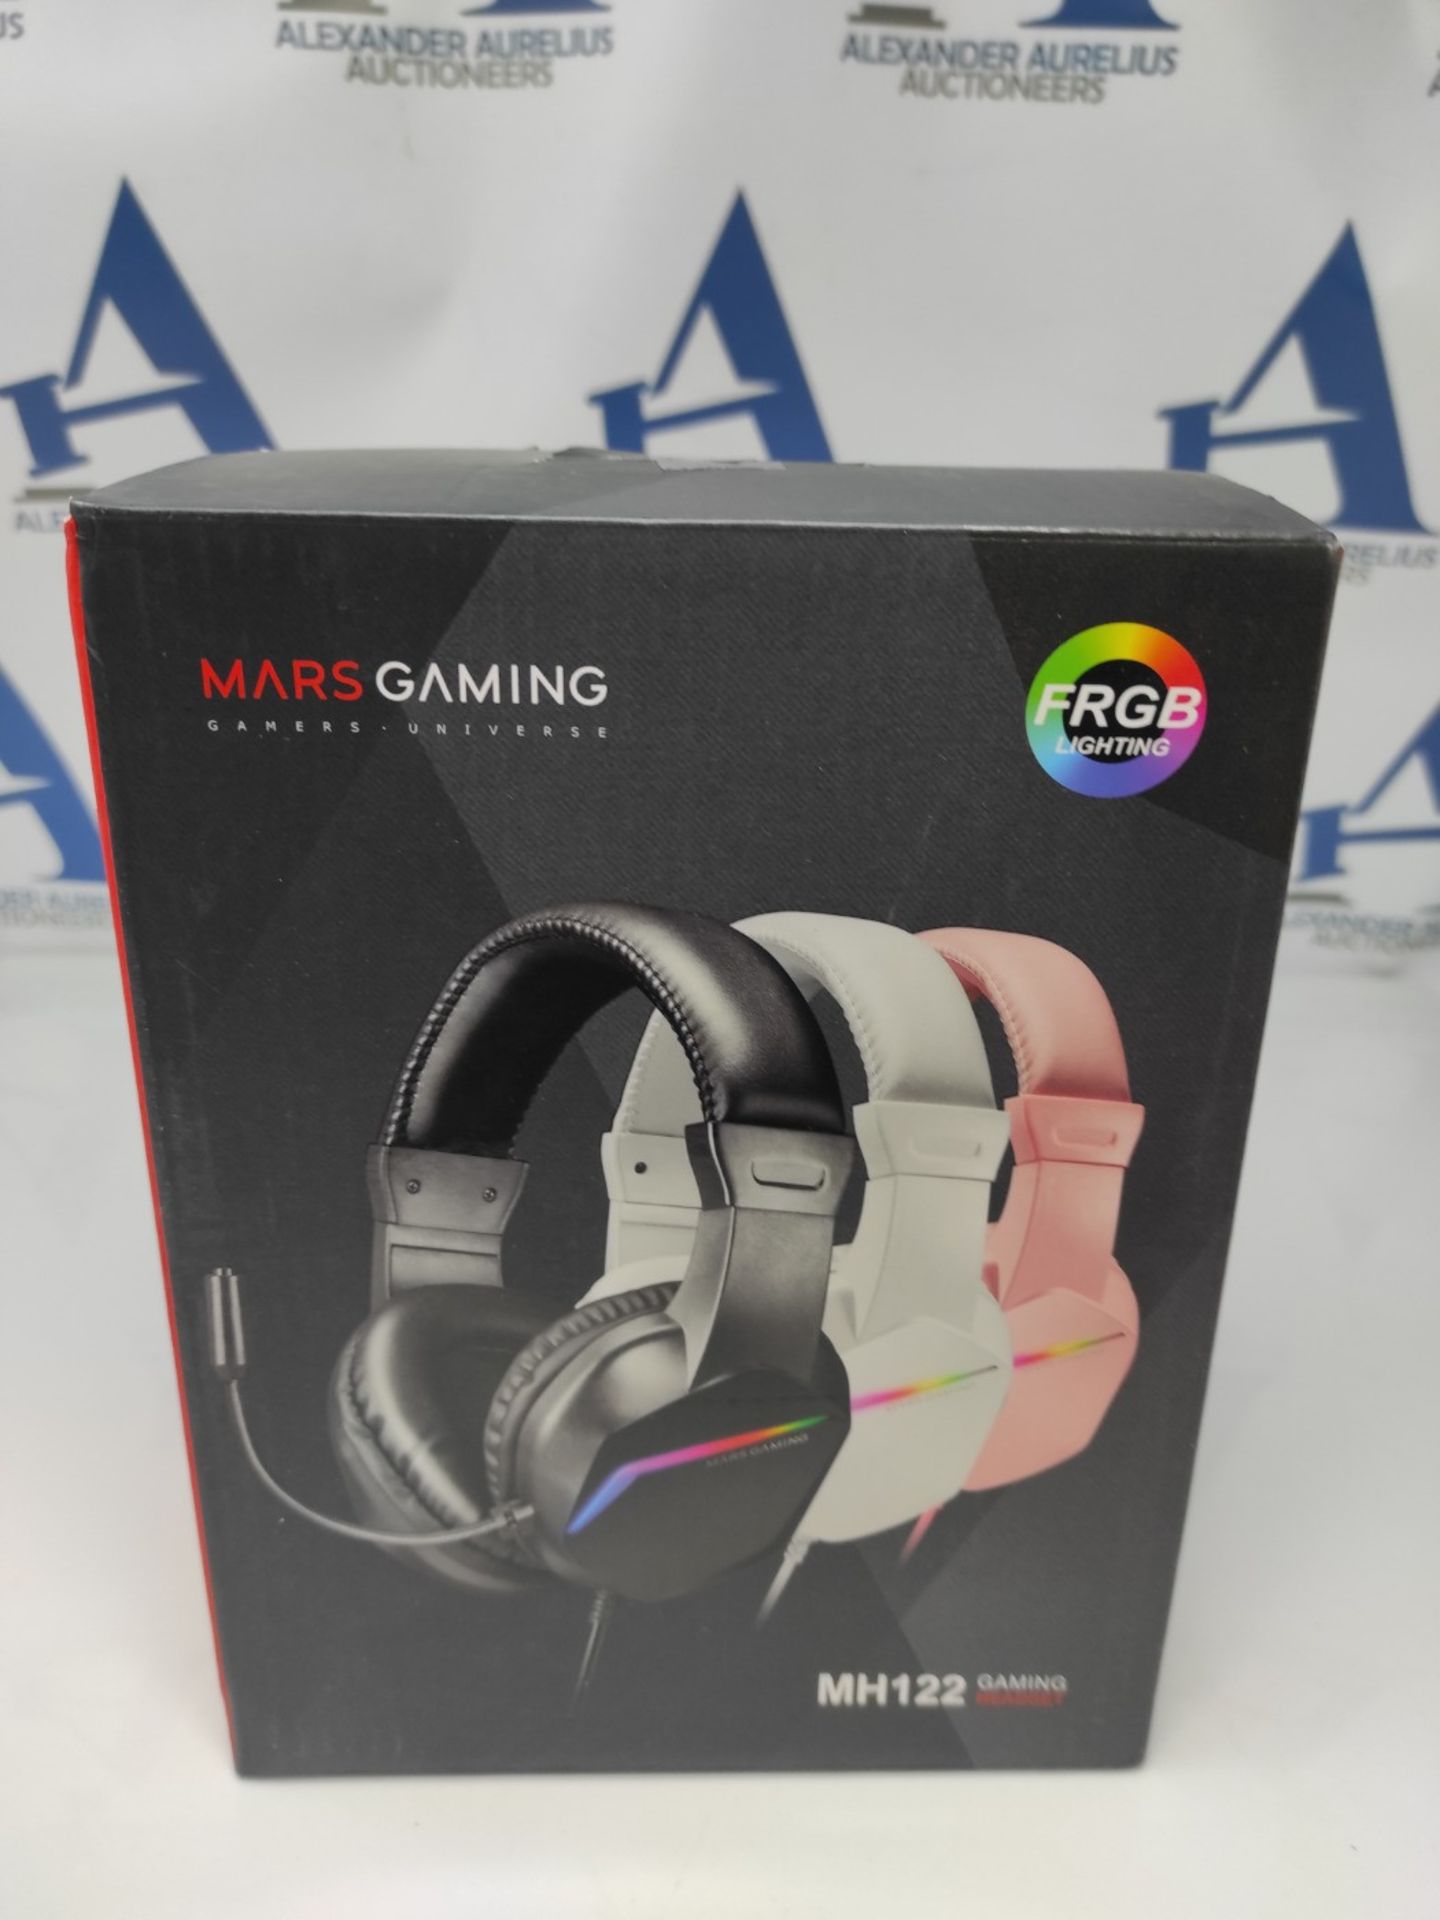 MARSGAMING MH122P MH122, Gaming Headset FRGB Over Ear with Microphone, HiFi Sound, Sou - Image 5 of 6